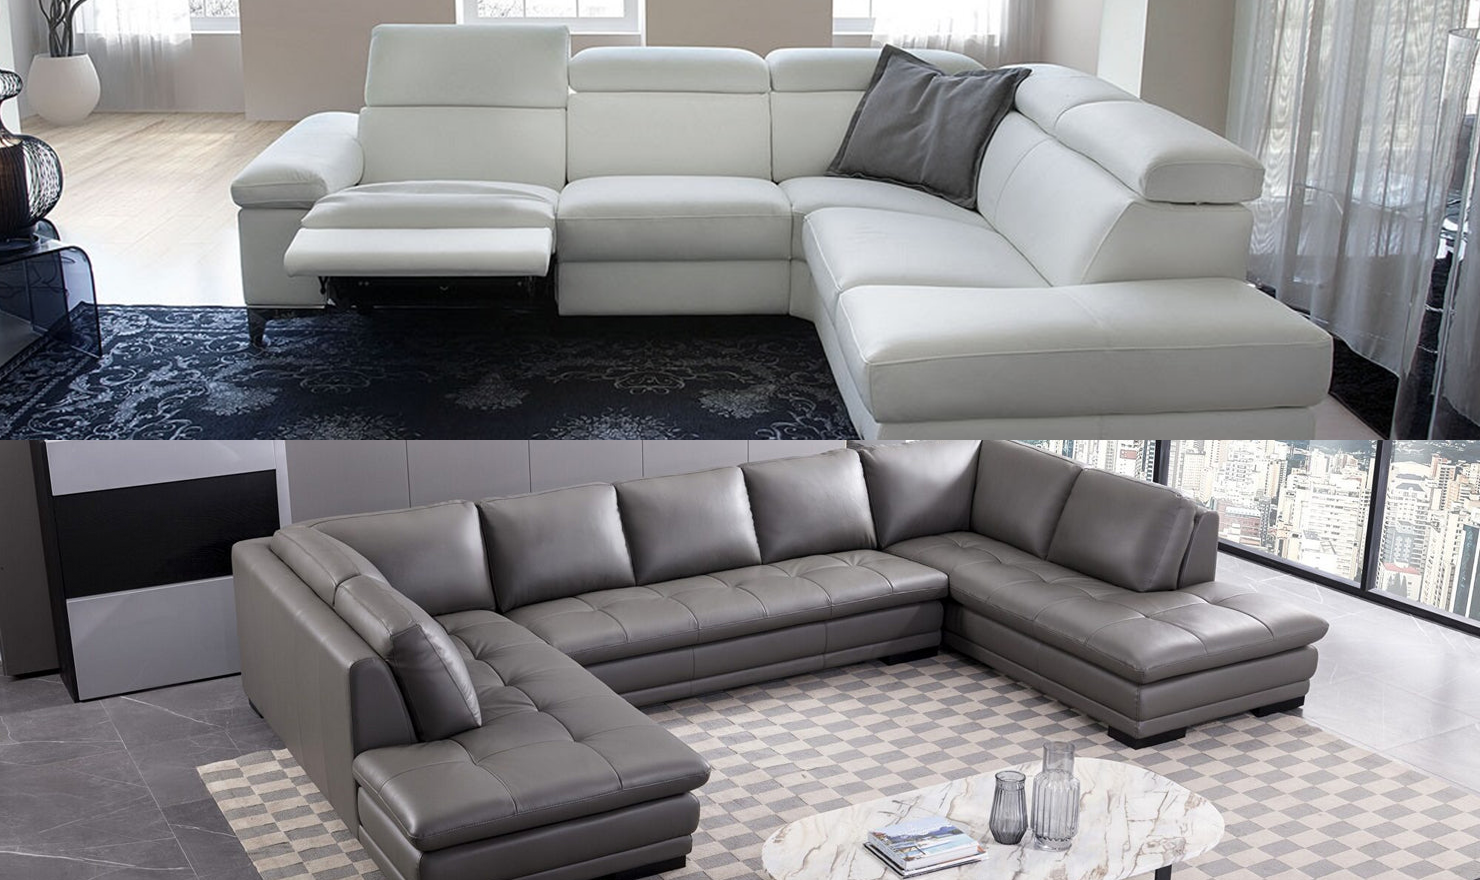 Benefits of U-Shaped and L-Shaped Sofas